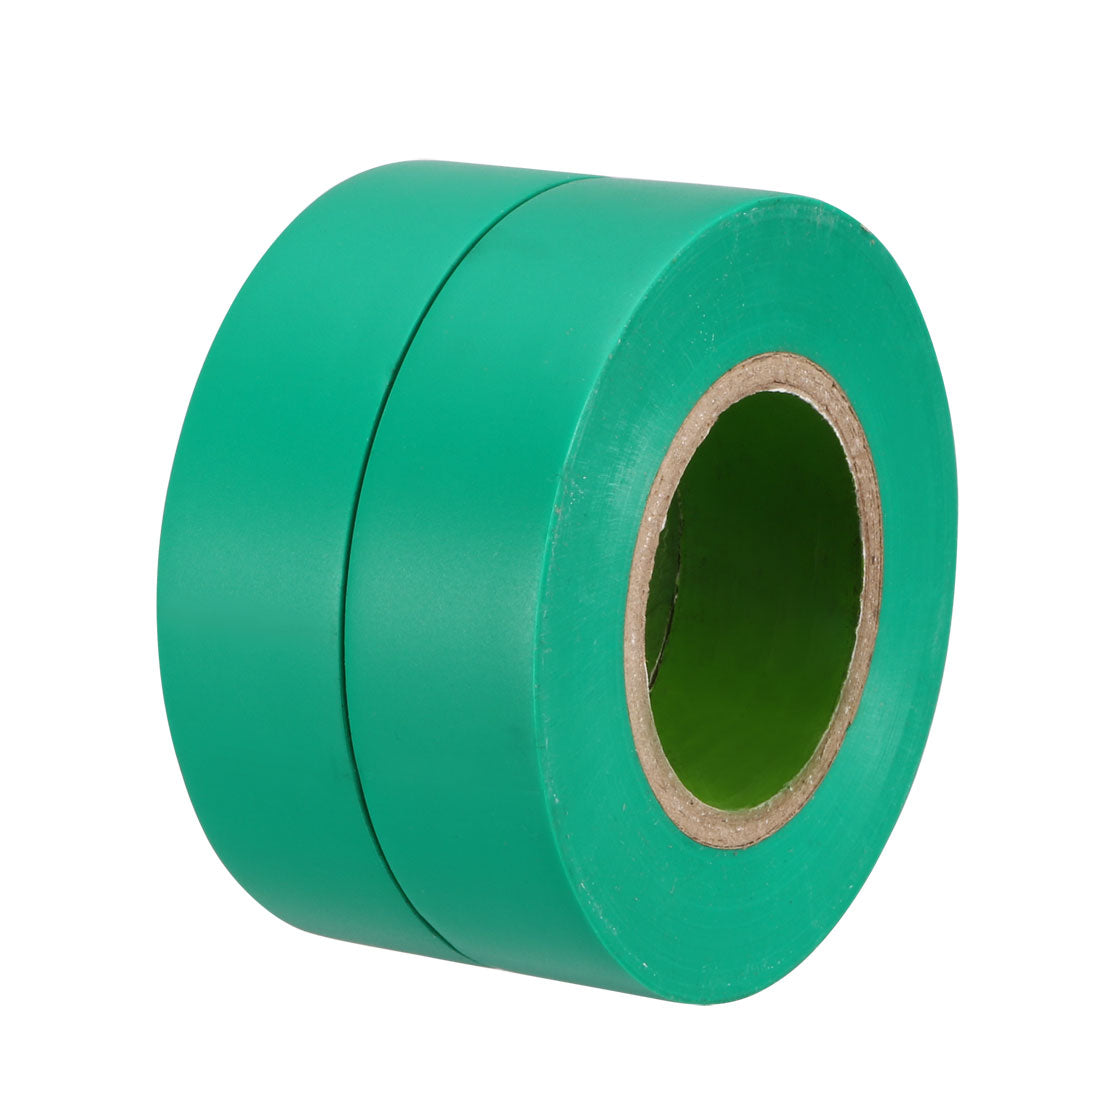 uxcell Uxcell Insulating Tape 18mm x20M x 0.1mm  PVC Electrical Tape Max. 600V Green 2pcs